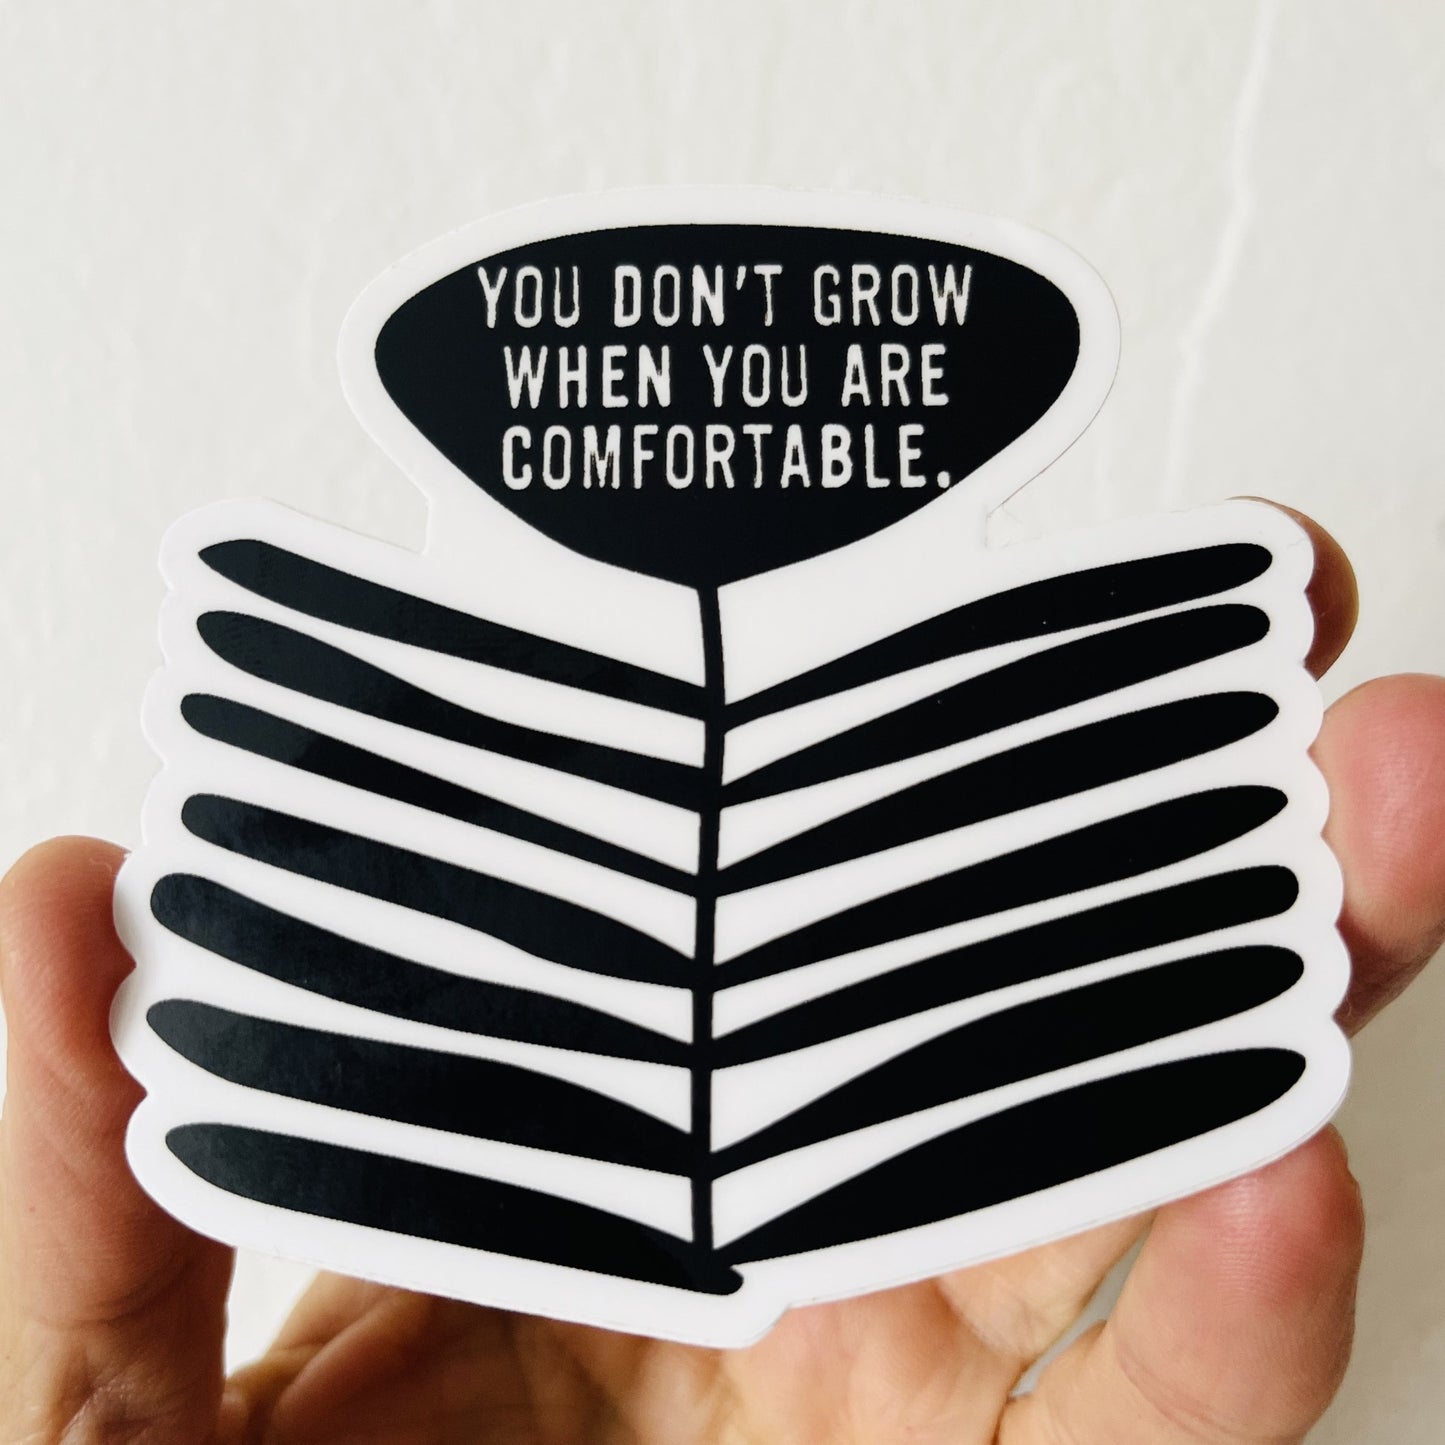 sticker you don't grow when you are uncomfortable.